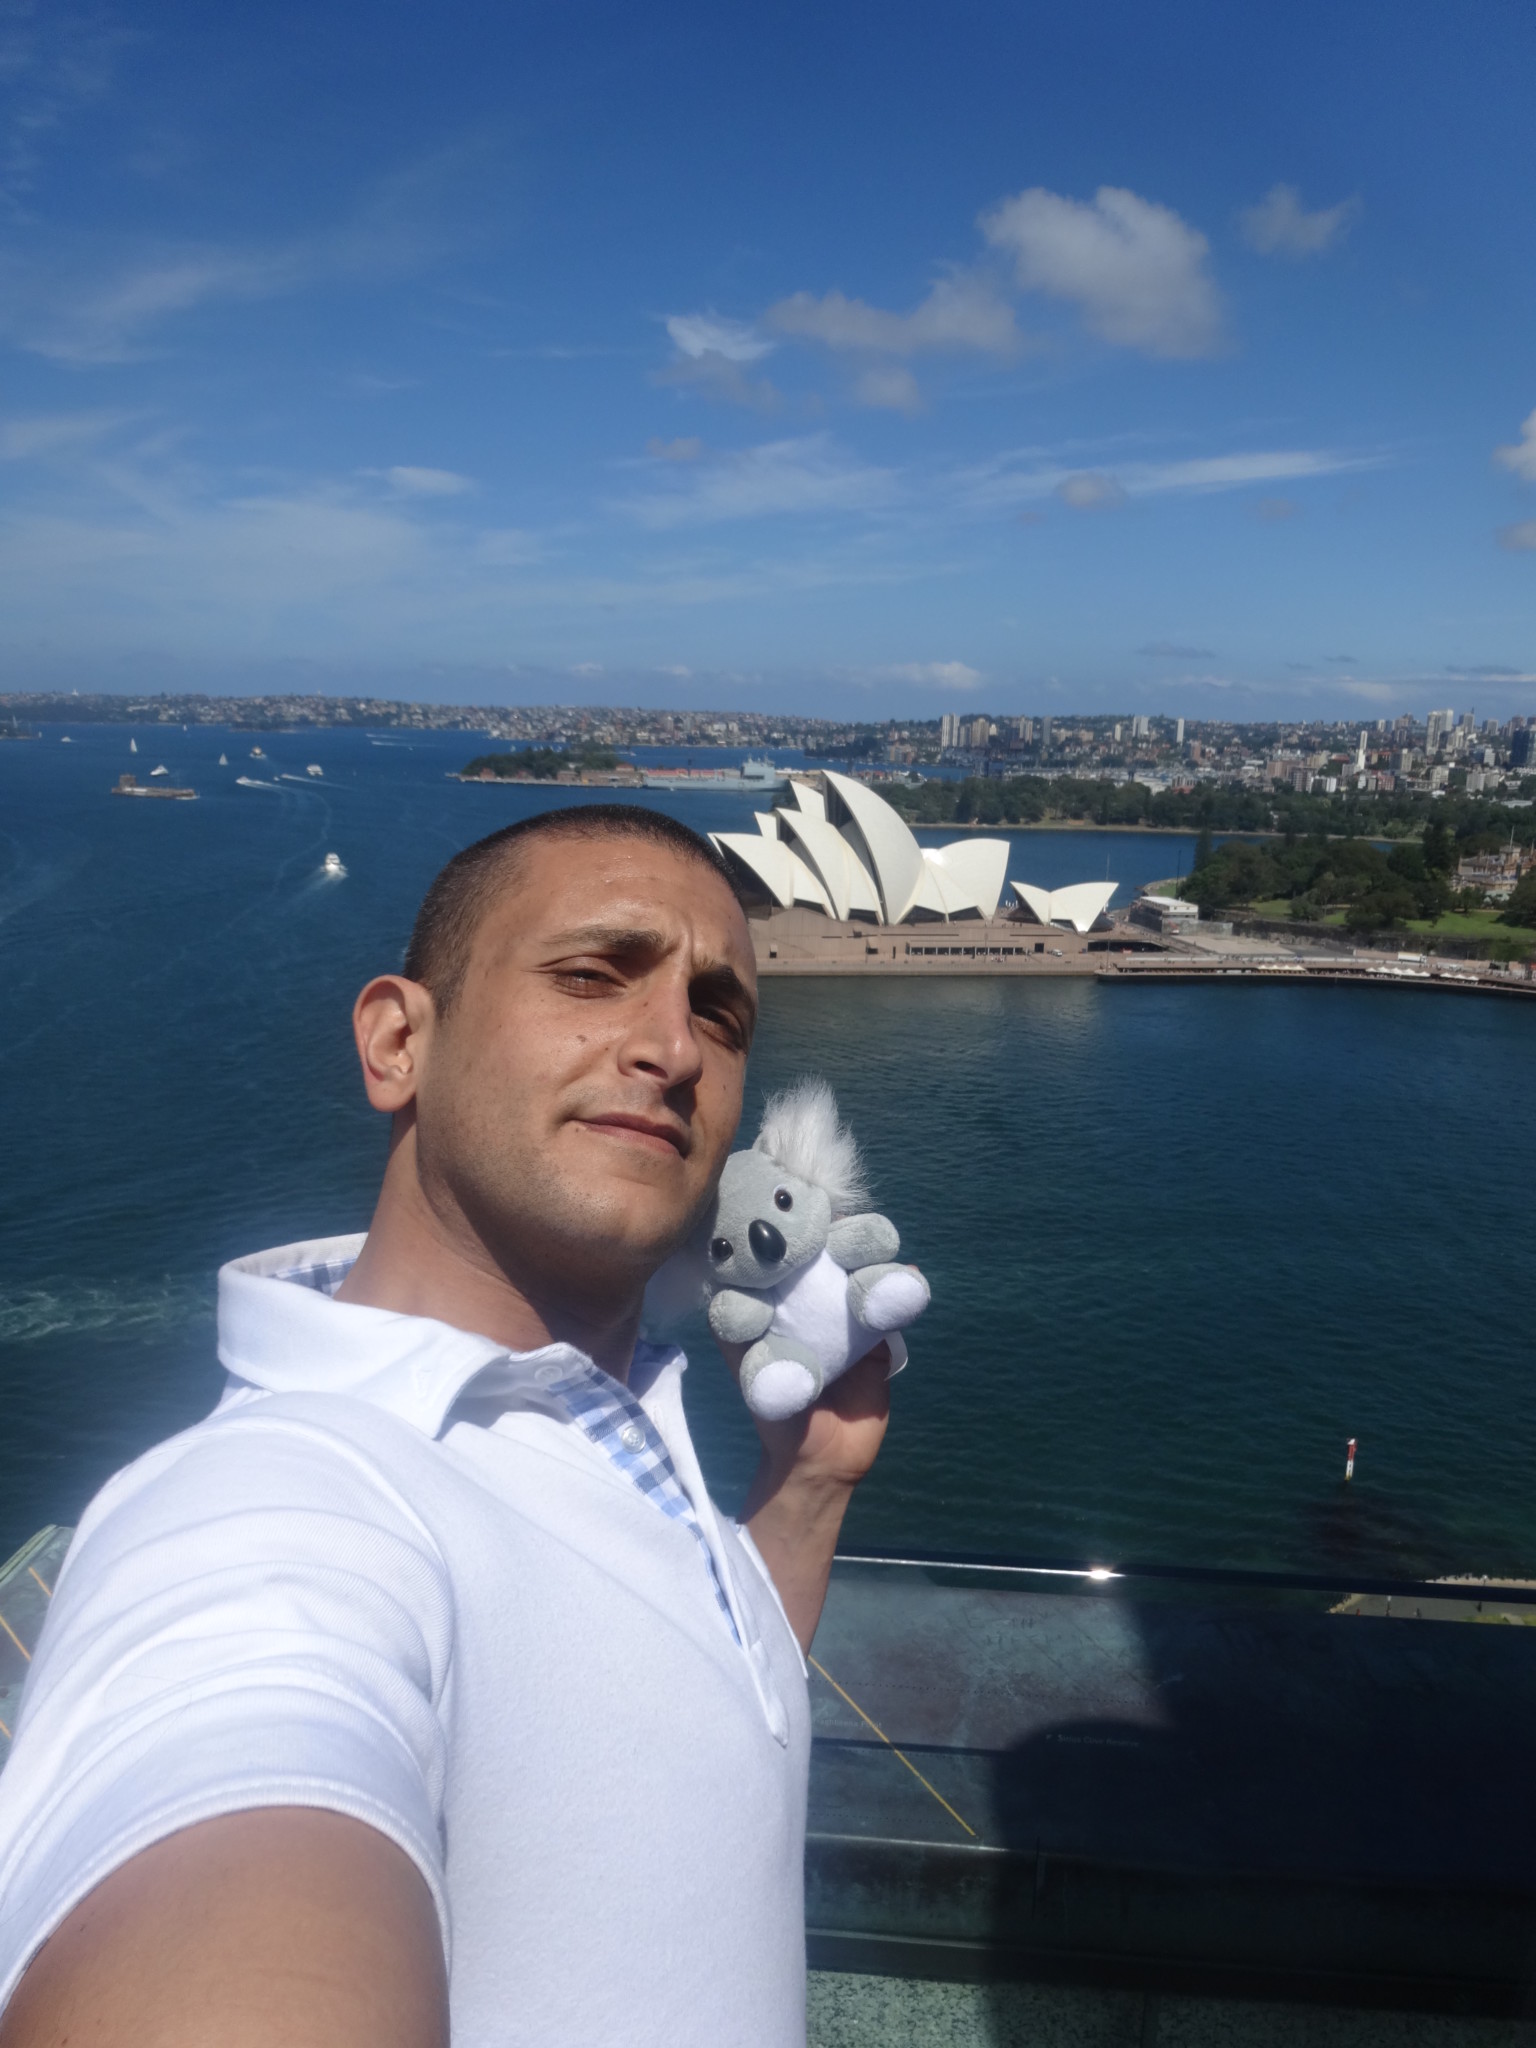 a man taking a selfie with a stuffed animal in front of a body of water